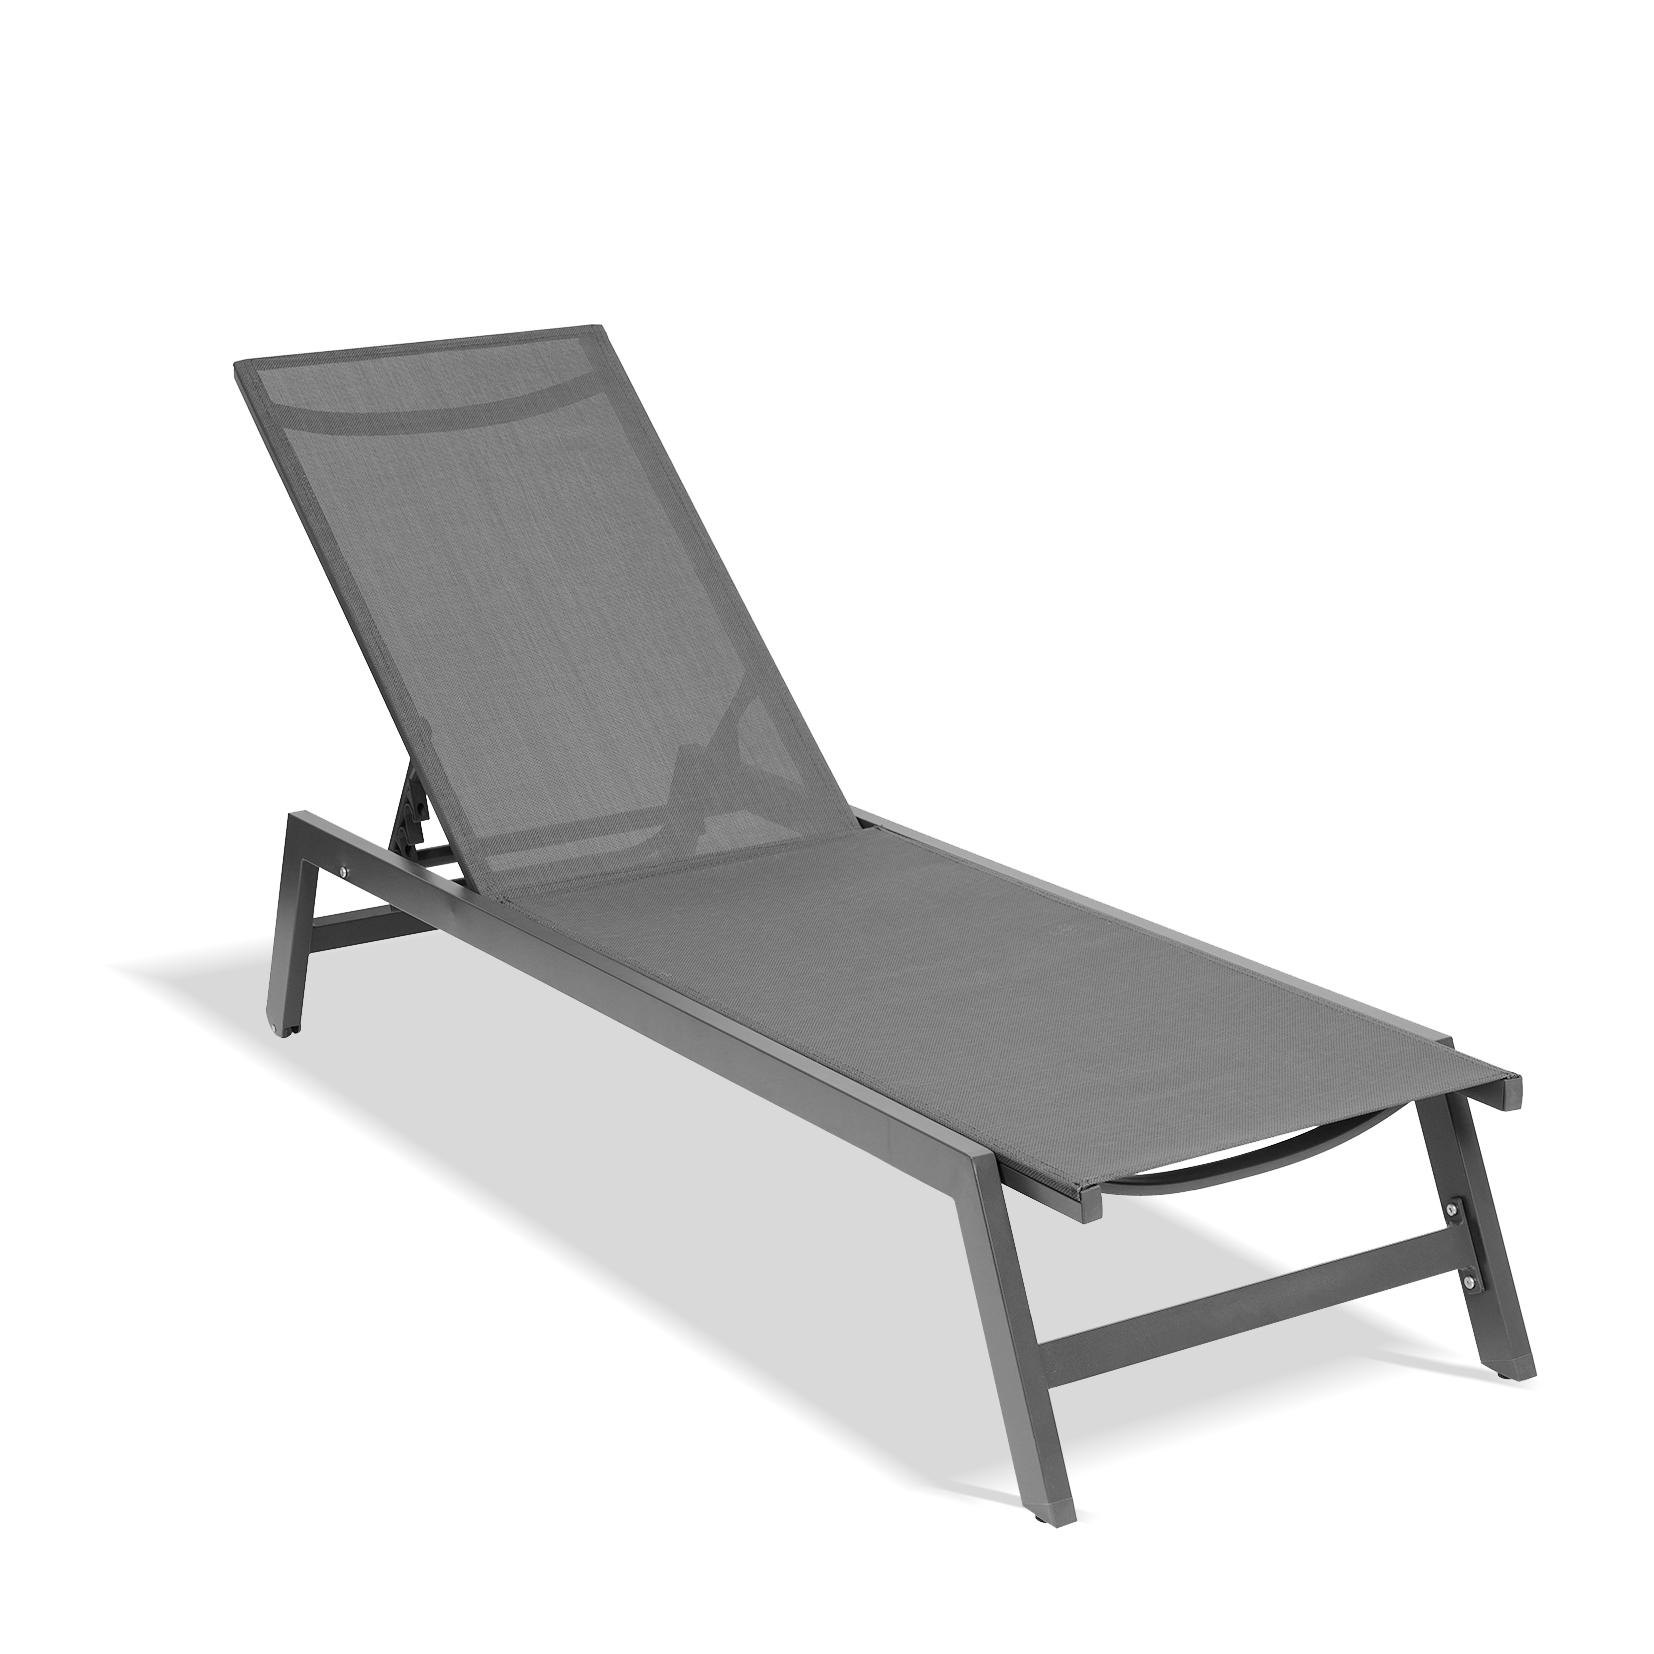 Outdoor Chaise Lounge Chair,Five-Position Adjustable Aluminum Recliner,All Weather For Patio,Beach,Yard, Pool(Grey Frame/Dark Grey Fabric)-Boyel Living